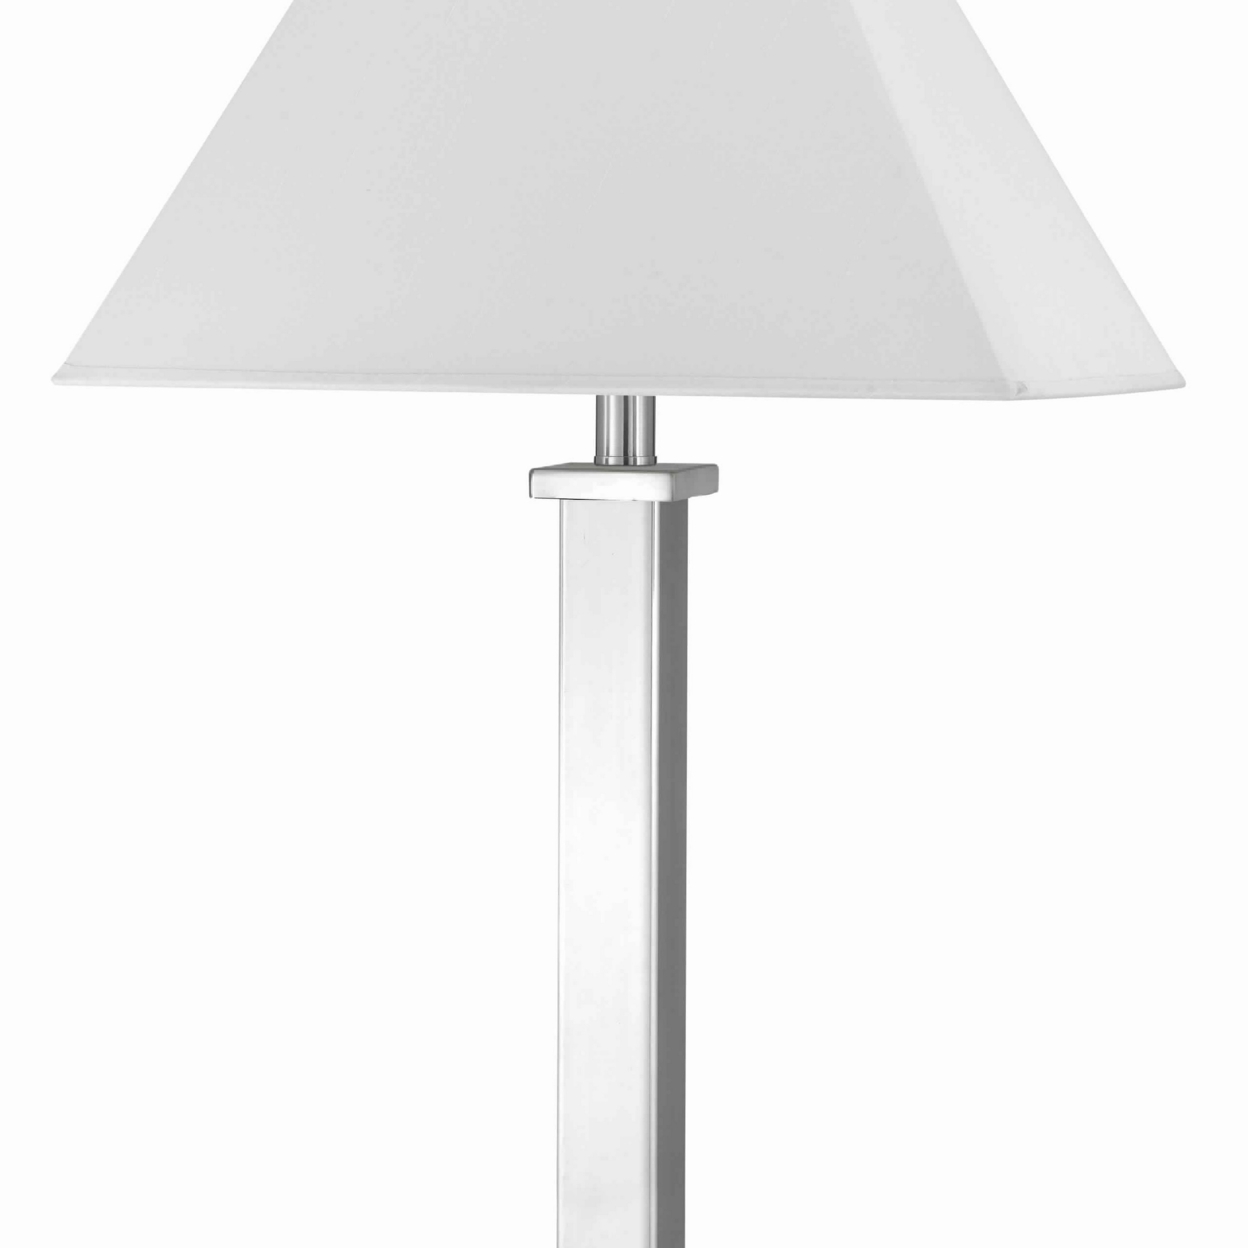 Trapezoid Shade Table Lamp With Metal Base And 2 USB Ports,White And Chrome- Saltoro Sherpi